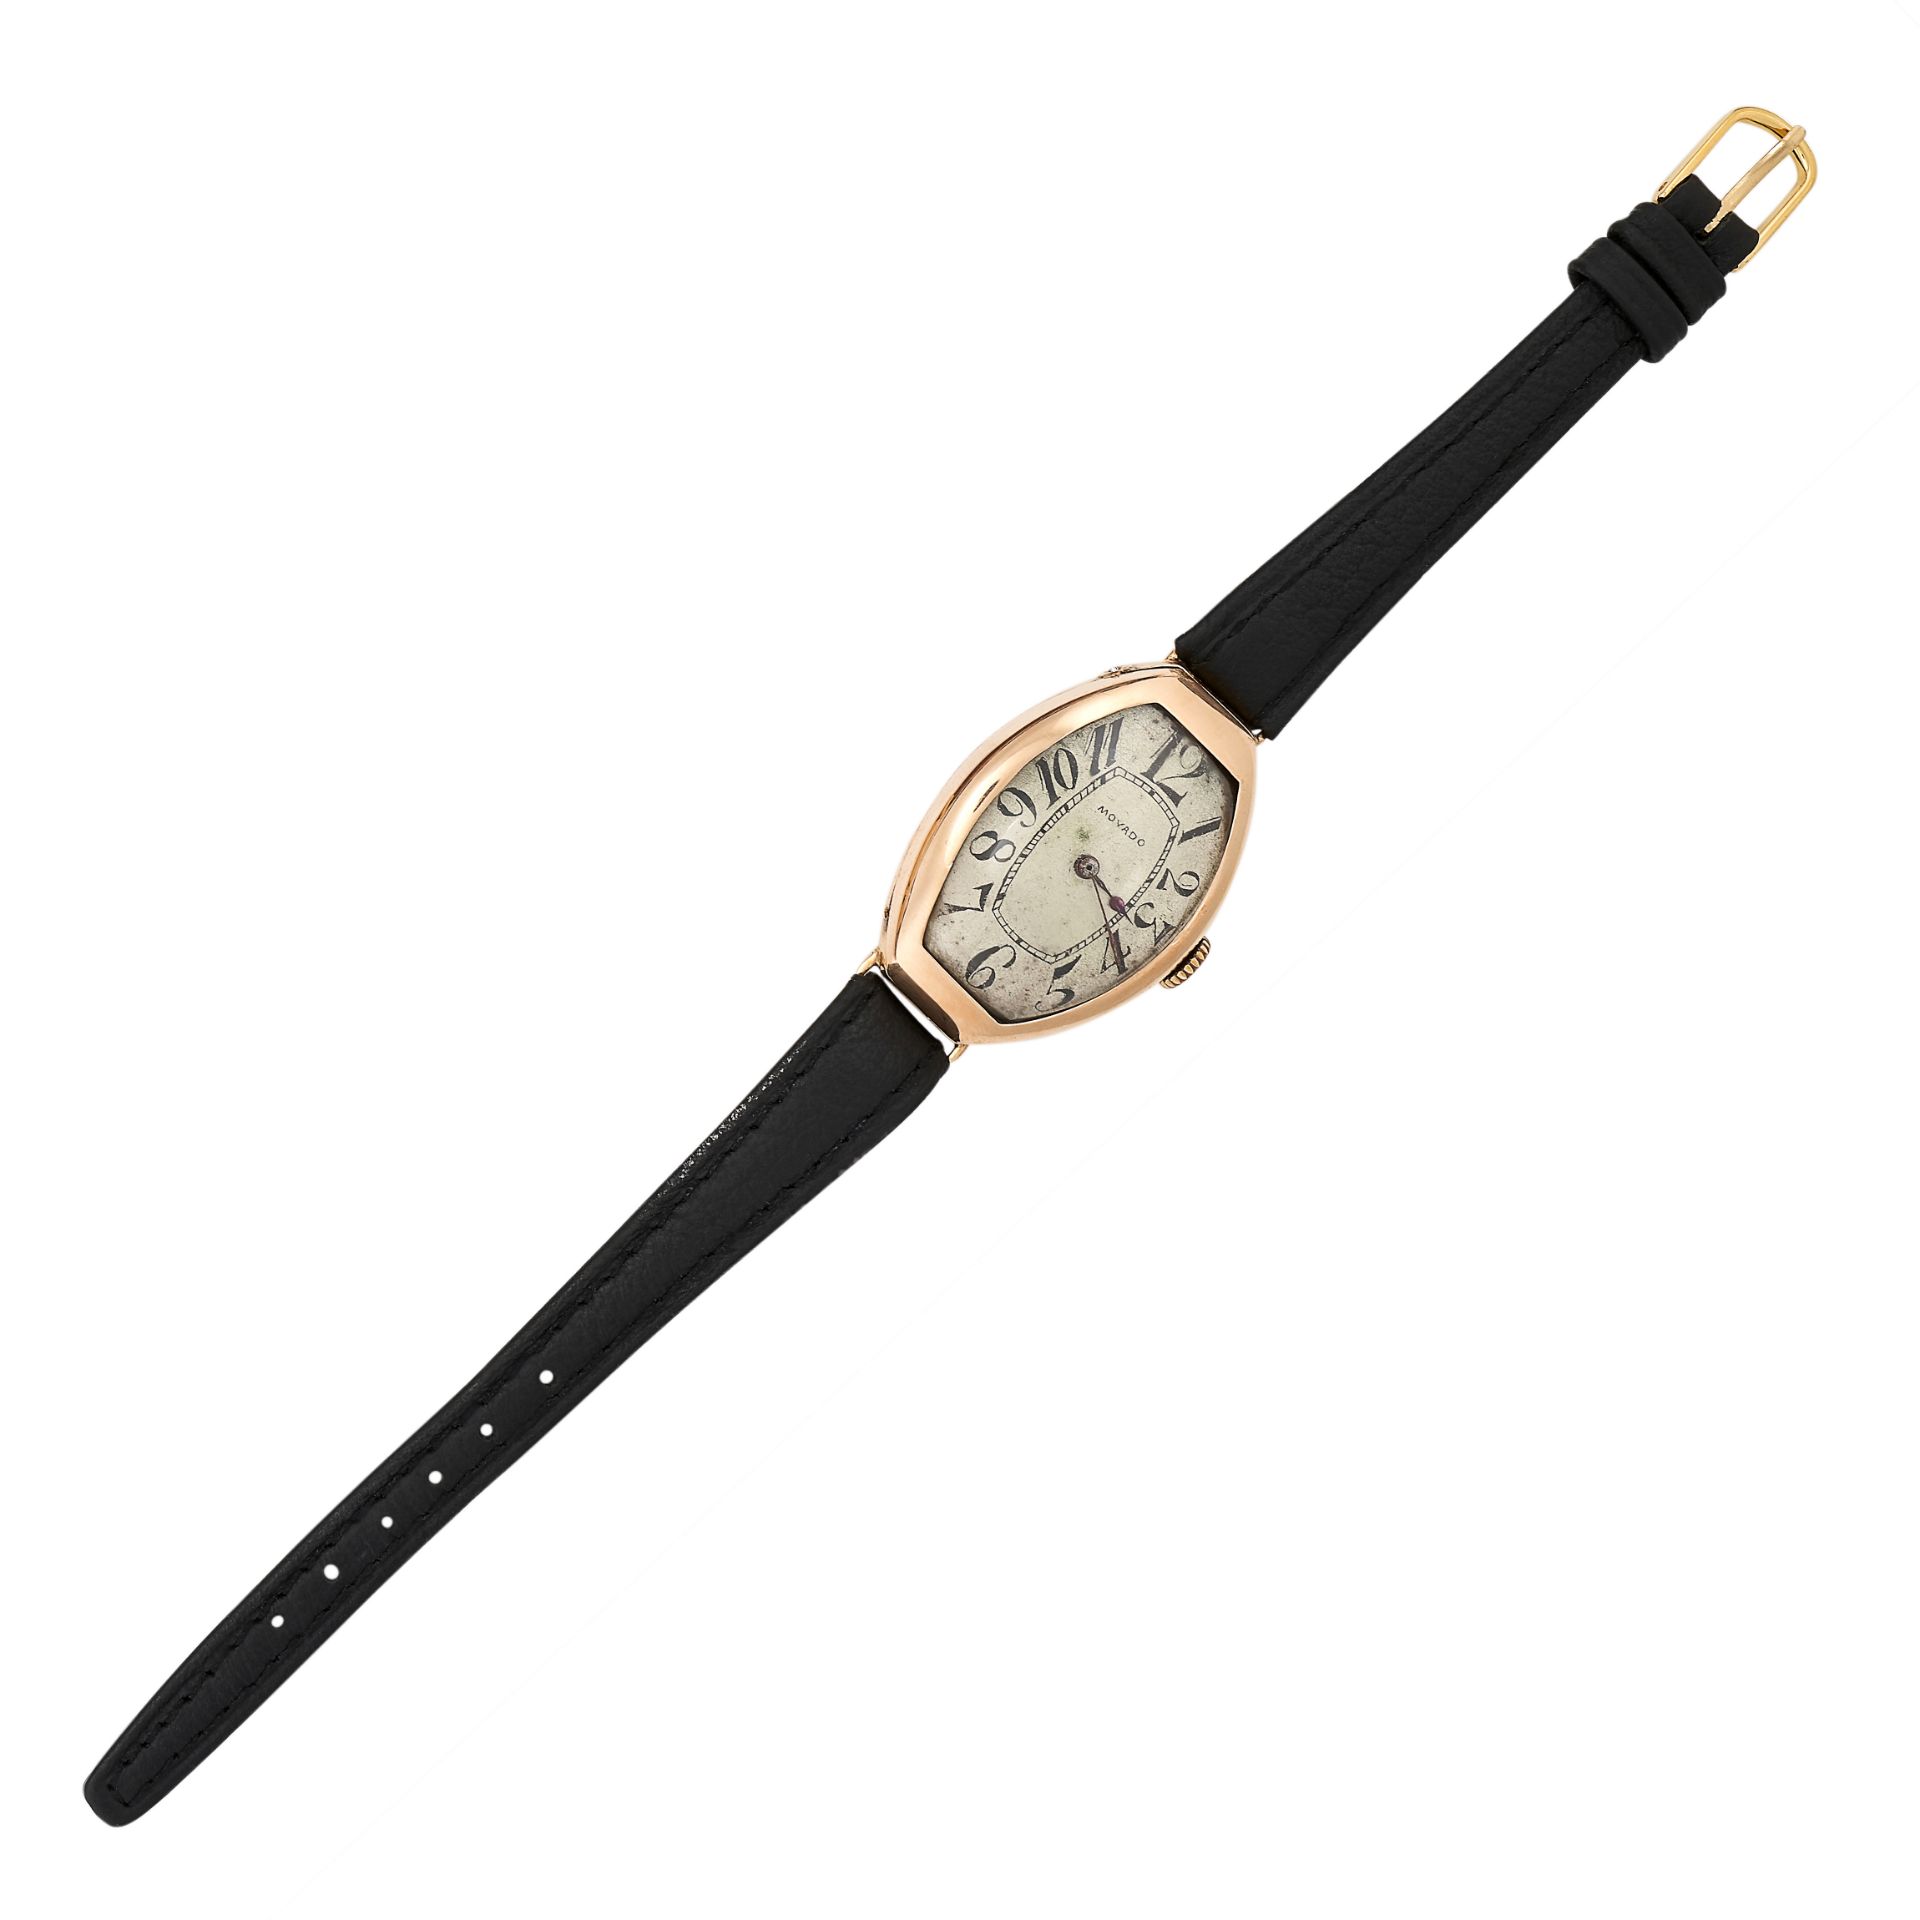 MOVADO, A TONNEAU SHAPED ANTIQUE WRISTWATCH, 1910-1920 in 14ct yellow gold, dial with Roman